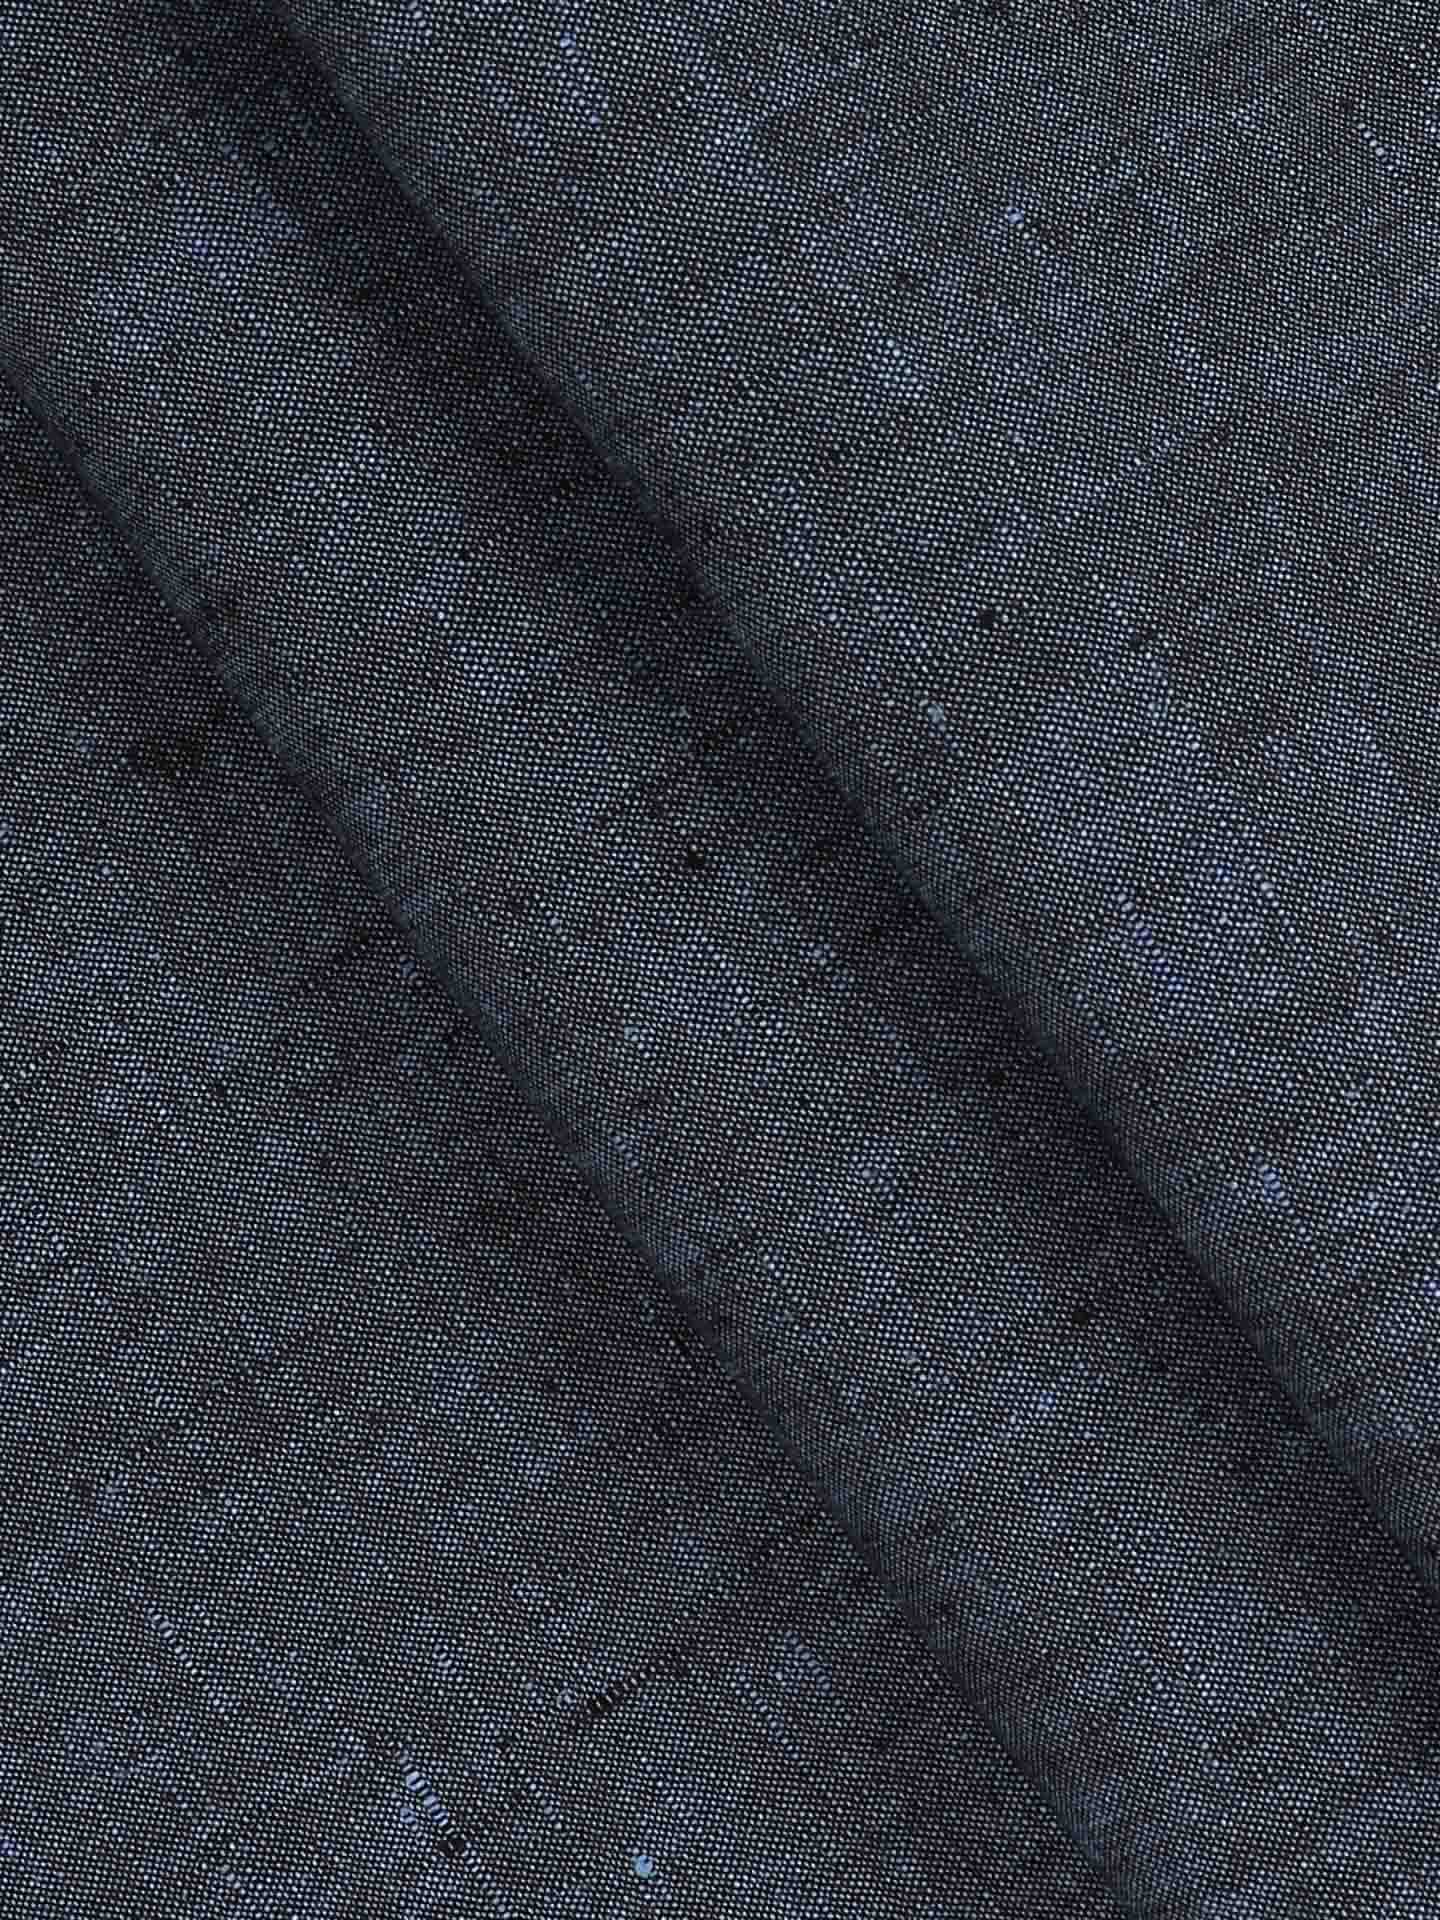 Linen Brooks Suiting Fabric Blue